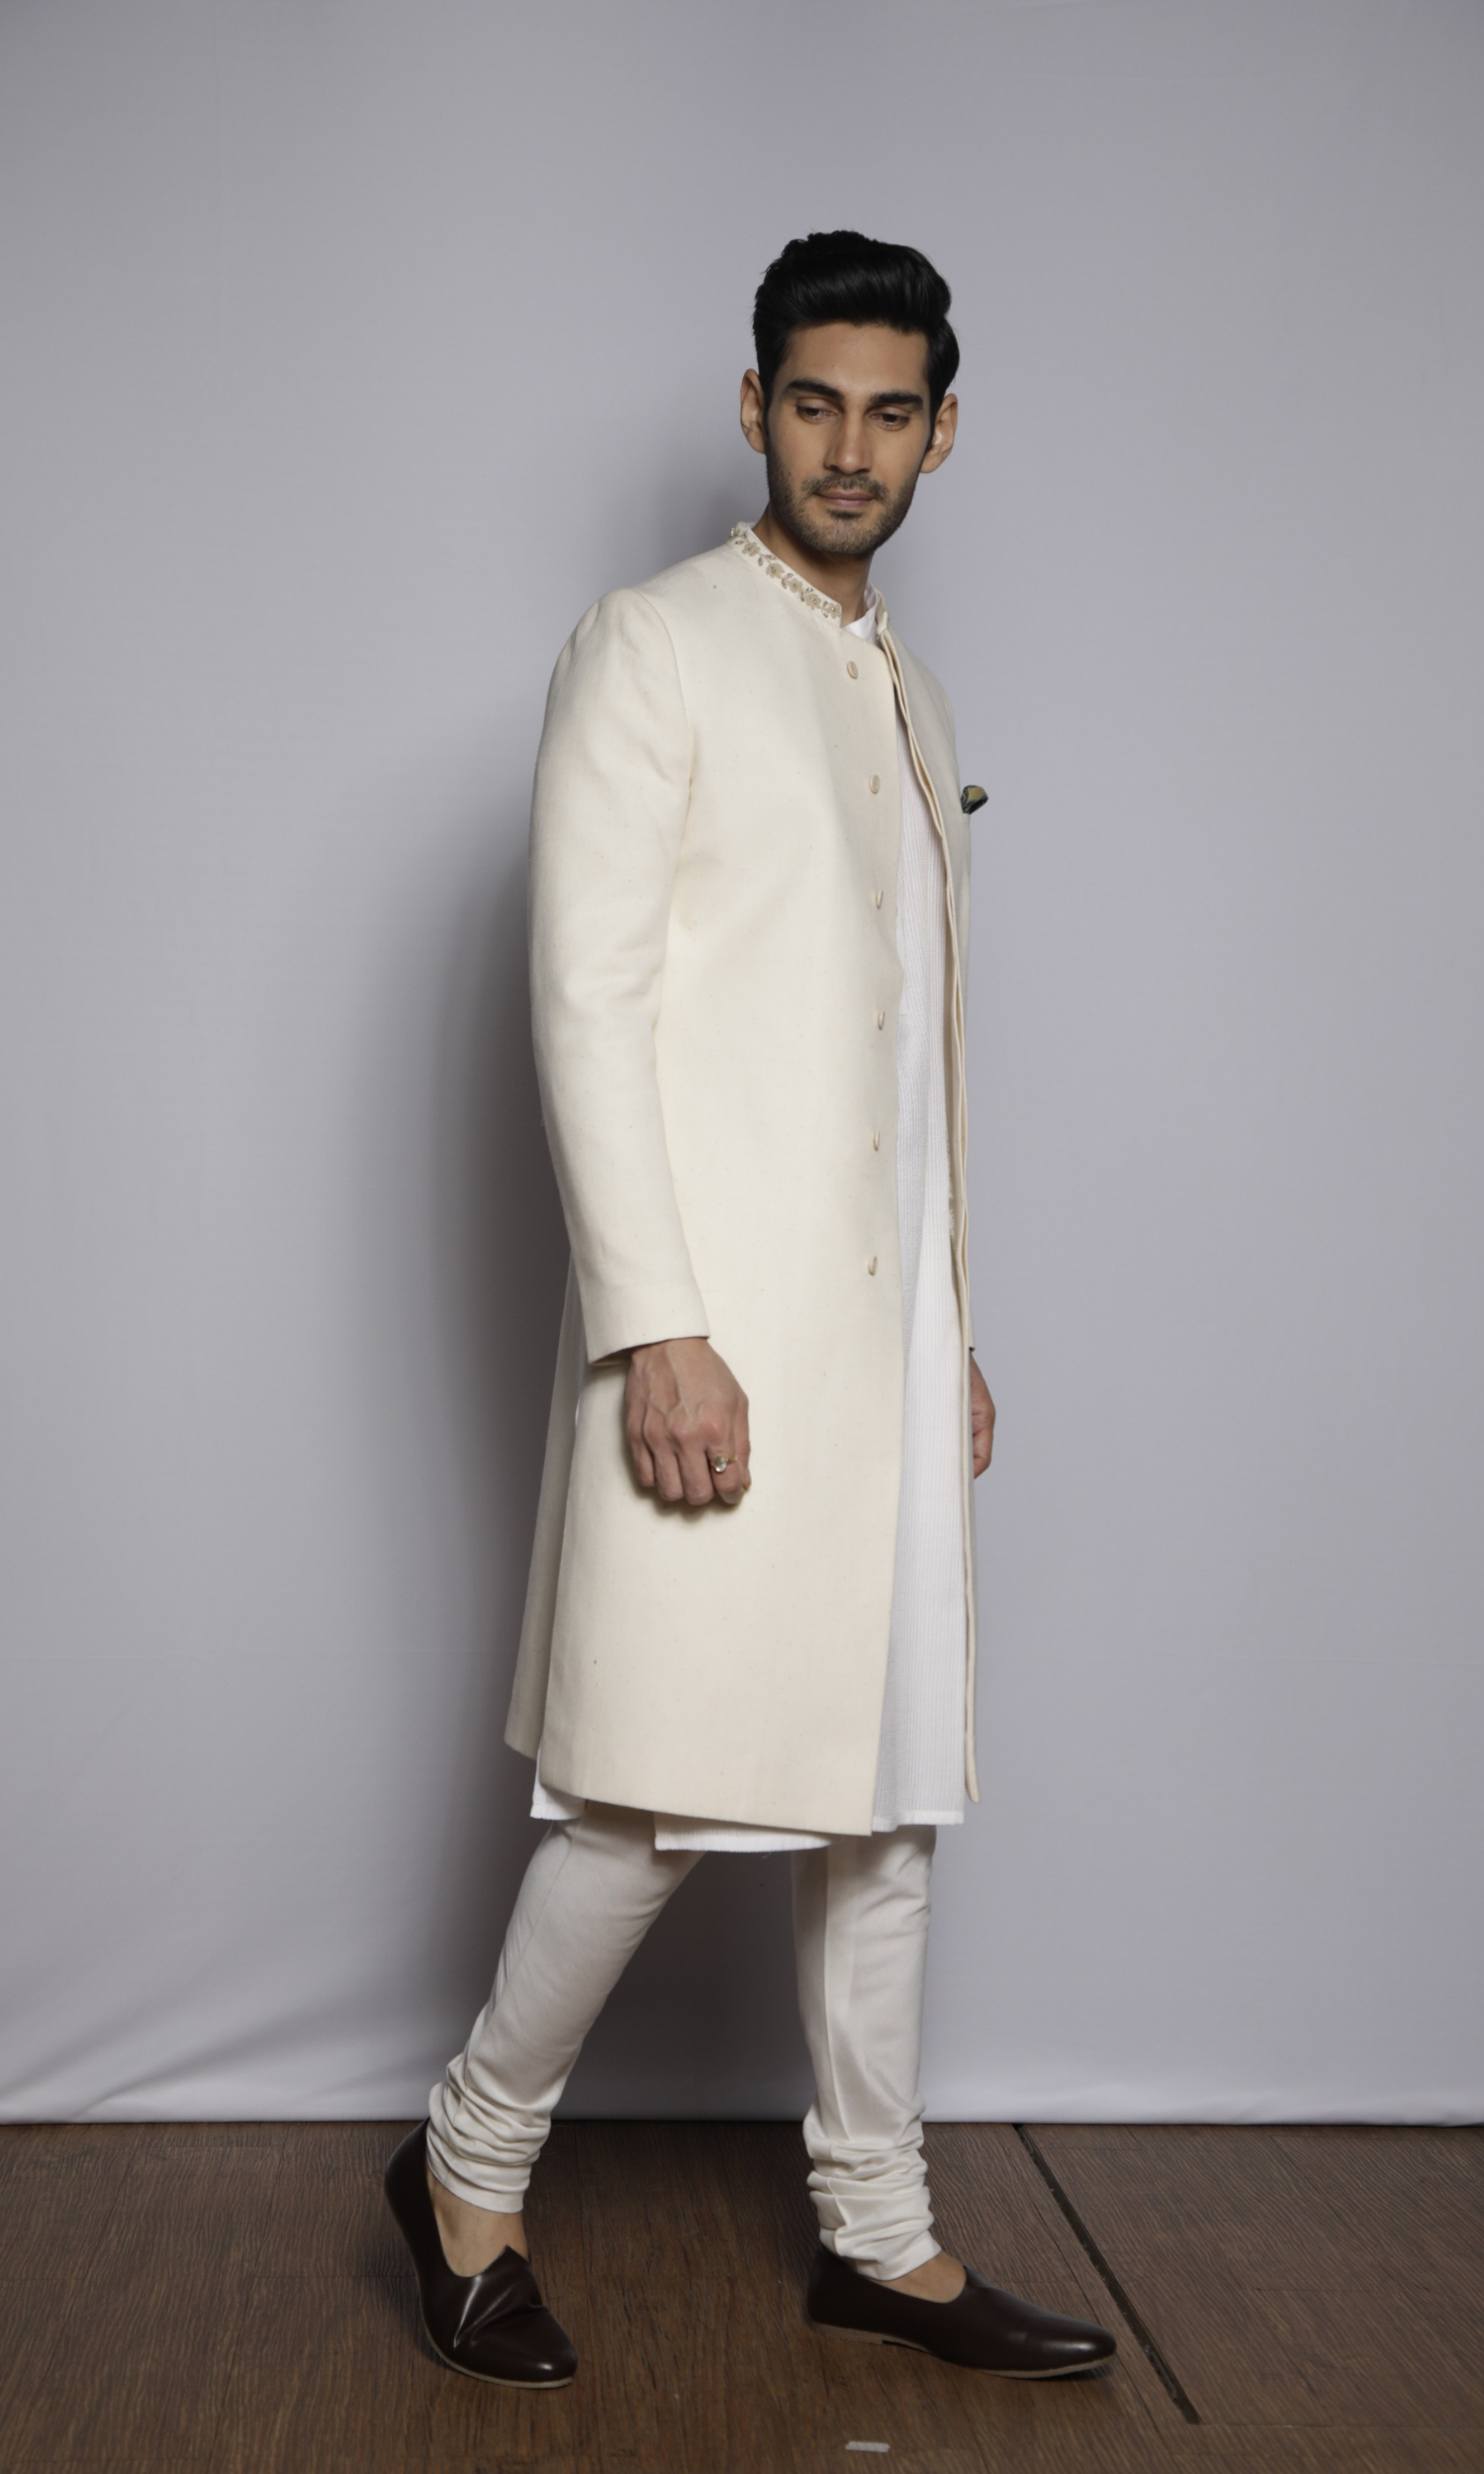 Off white sherwani with emb collar paired with front self threading kurta and churidar